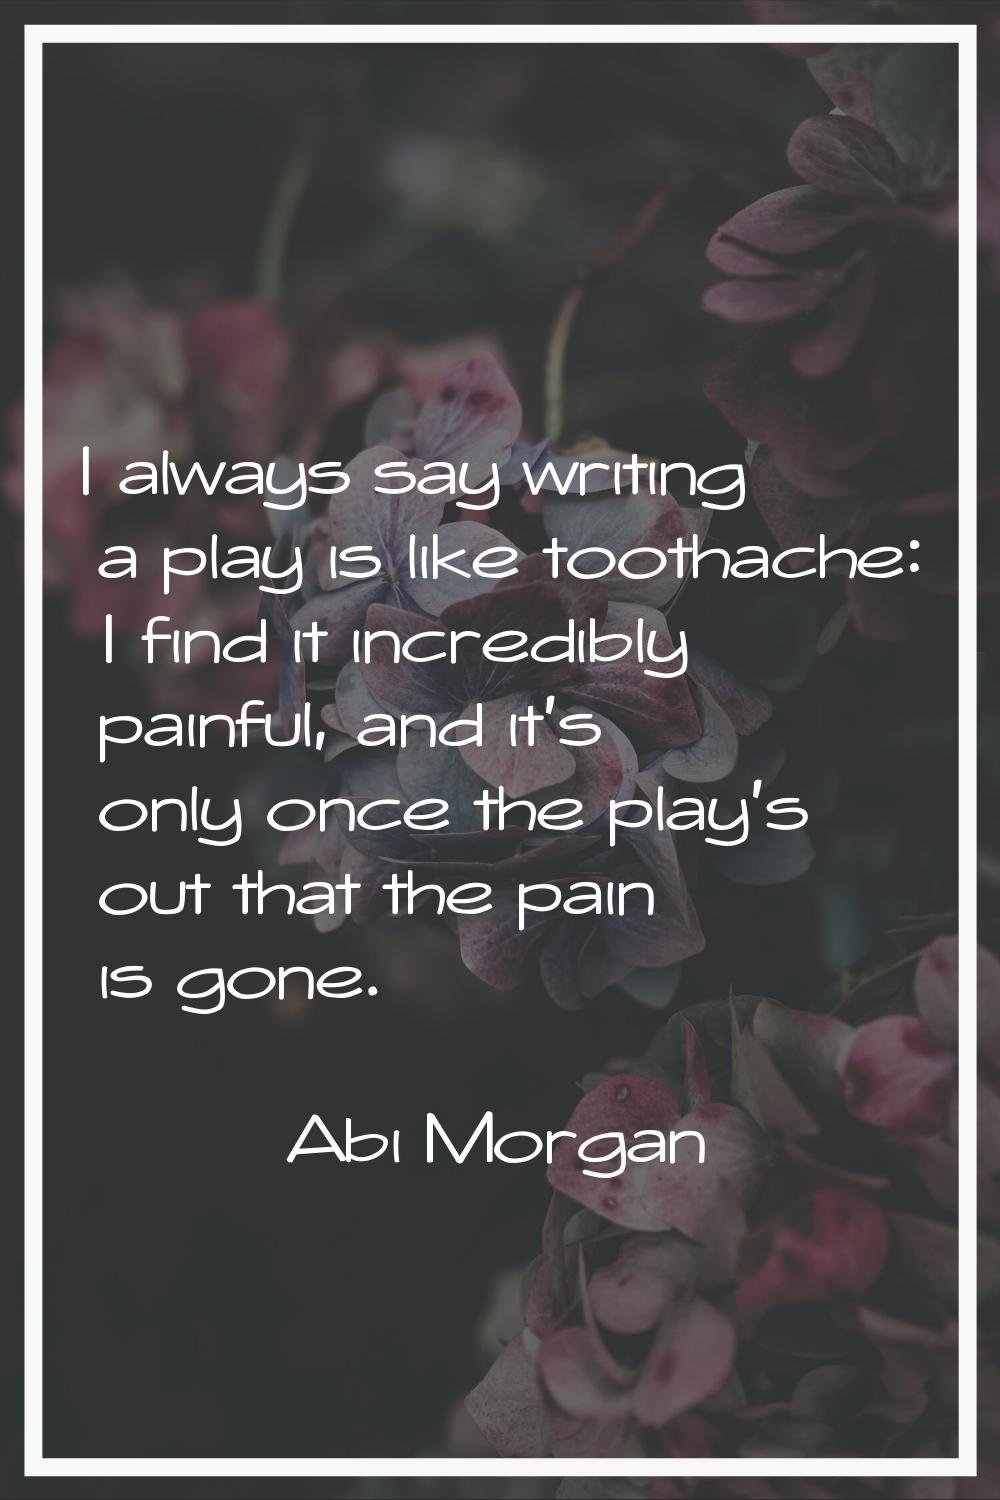 I always say writing a play is like toothache: I find it incredibly painful, and it's only once the